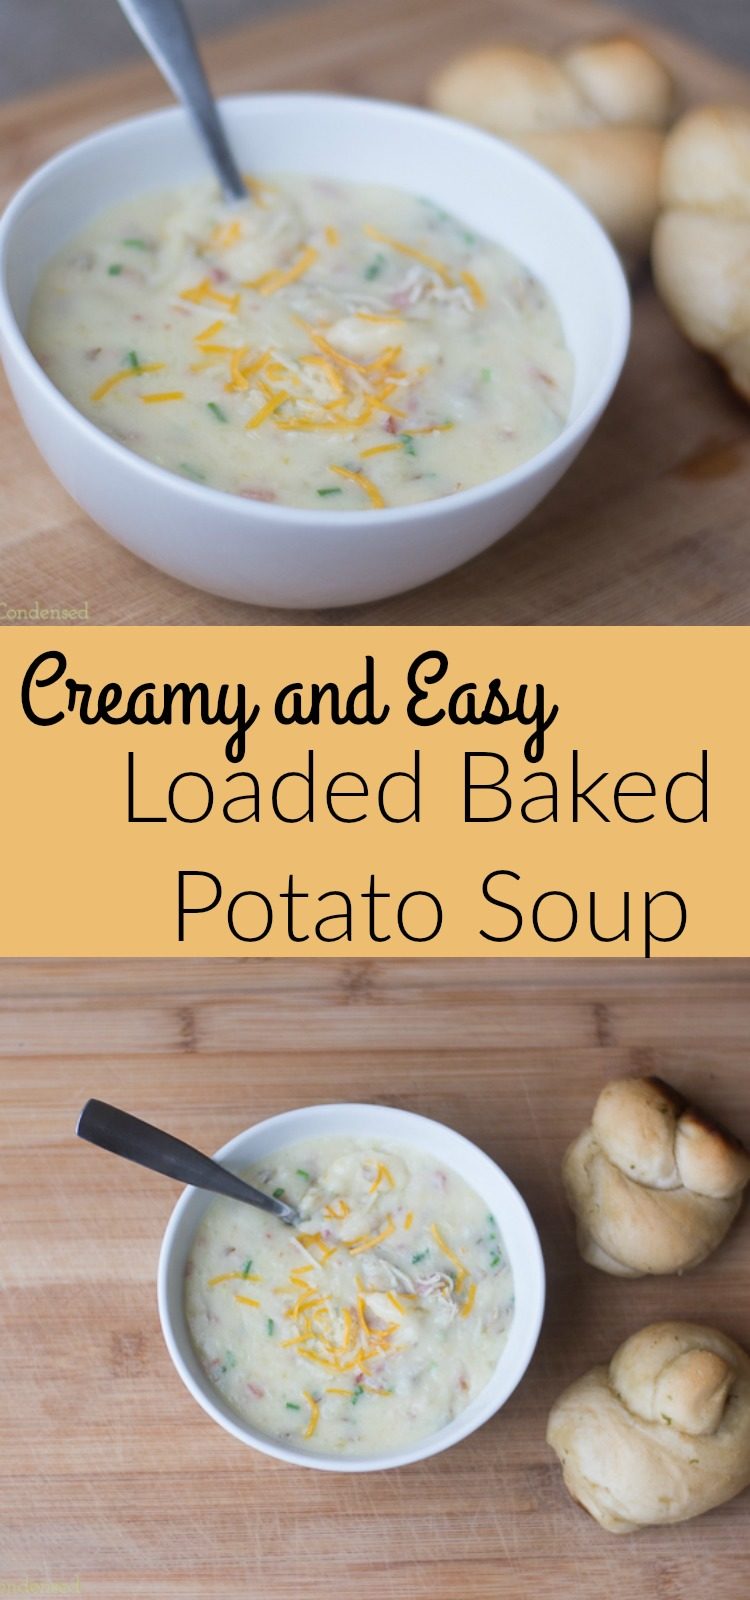 A creamy, loaded baked potato soup recipe that is so easy to throw together. We love serving this with warm garlic knots and on cold winter nights!